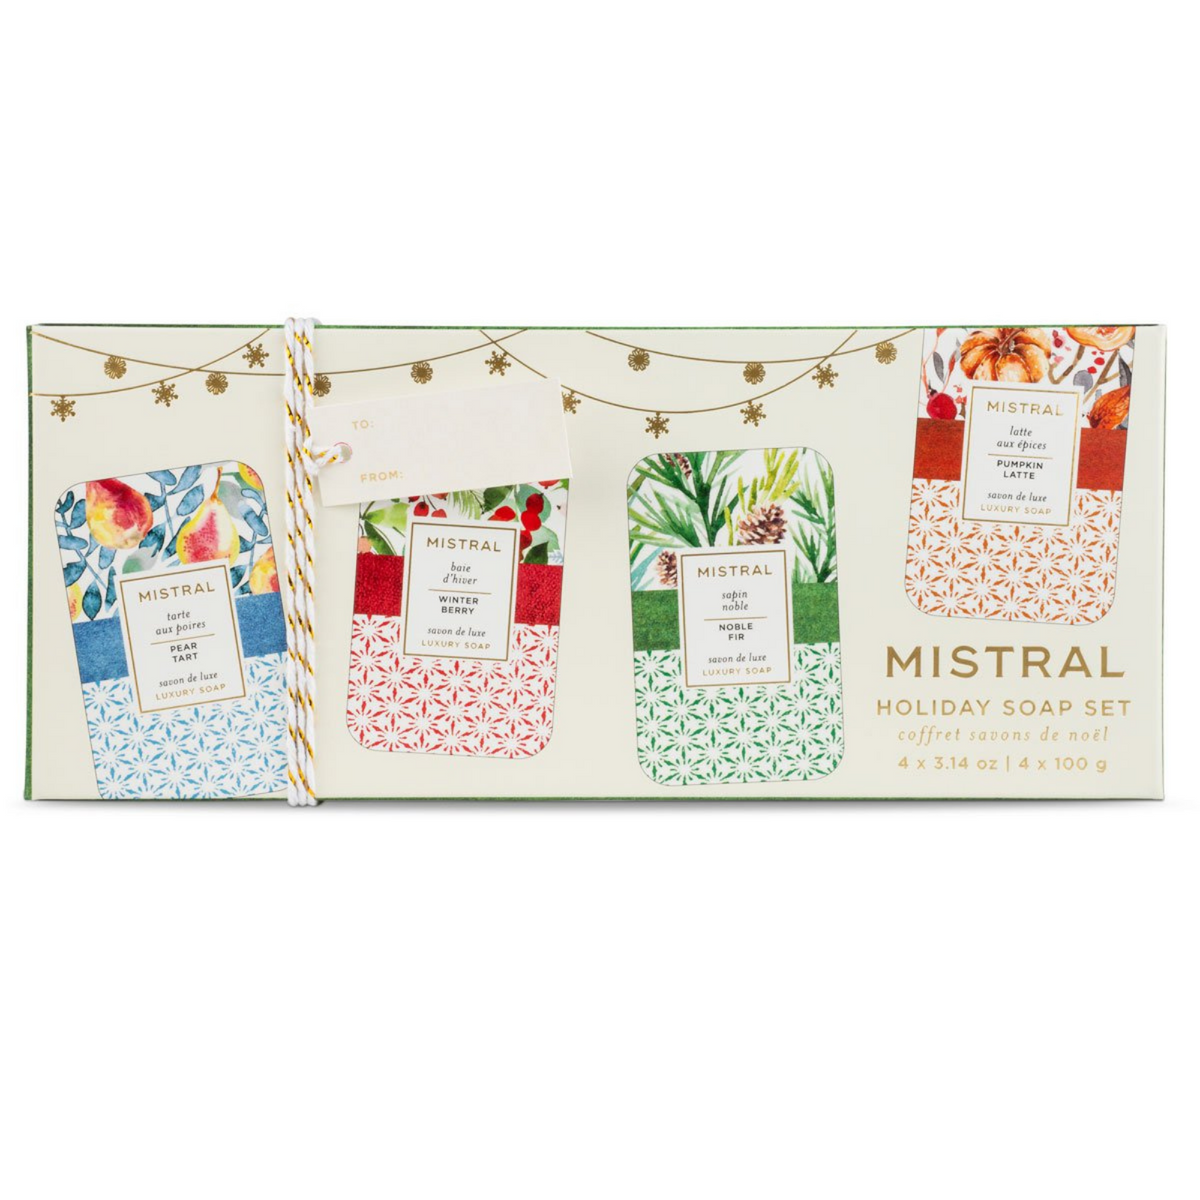 Primary Image of Papiers Fantaisie Holiday Soap Set